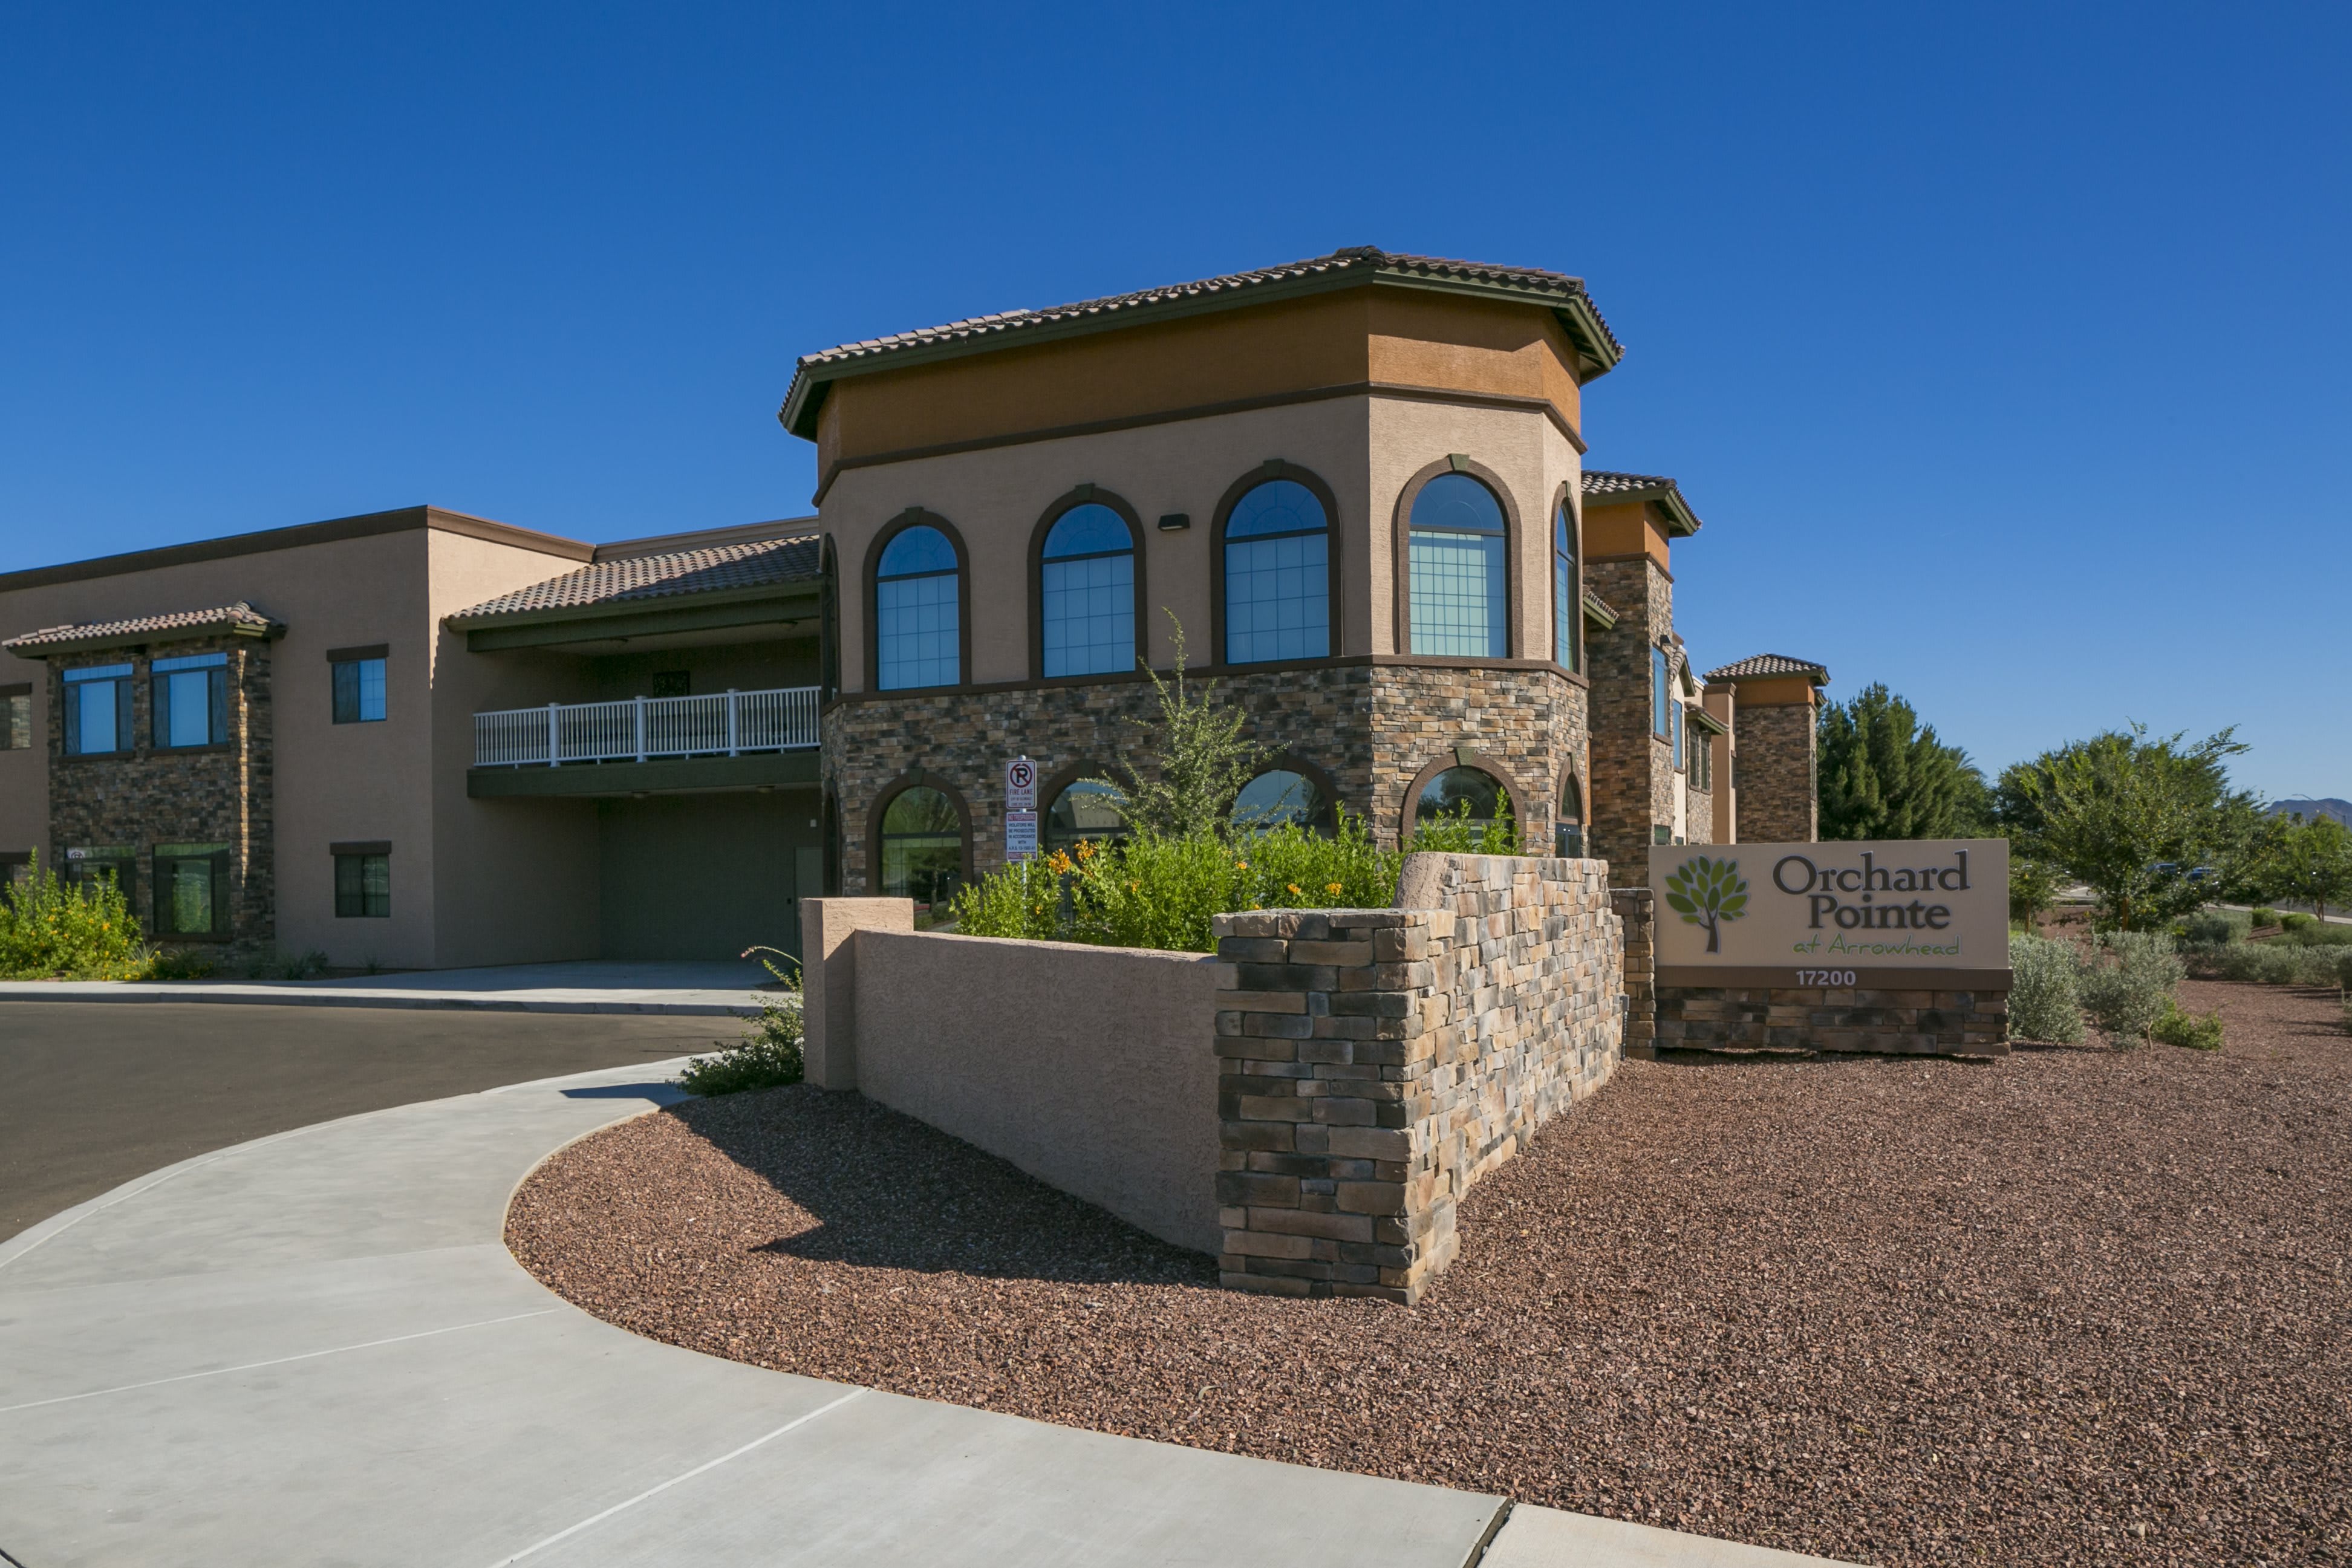 Orchard Pointe at Arrowhead community exterior